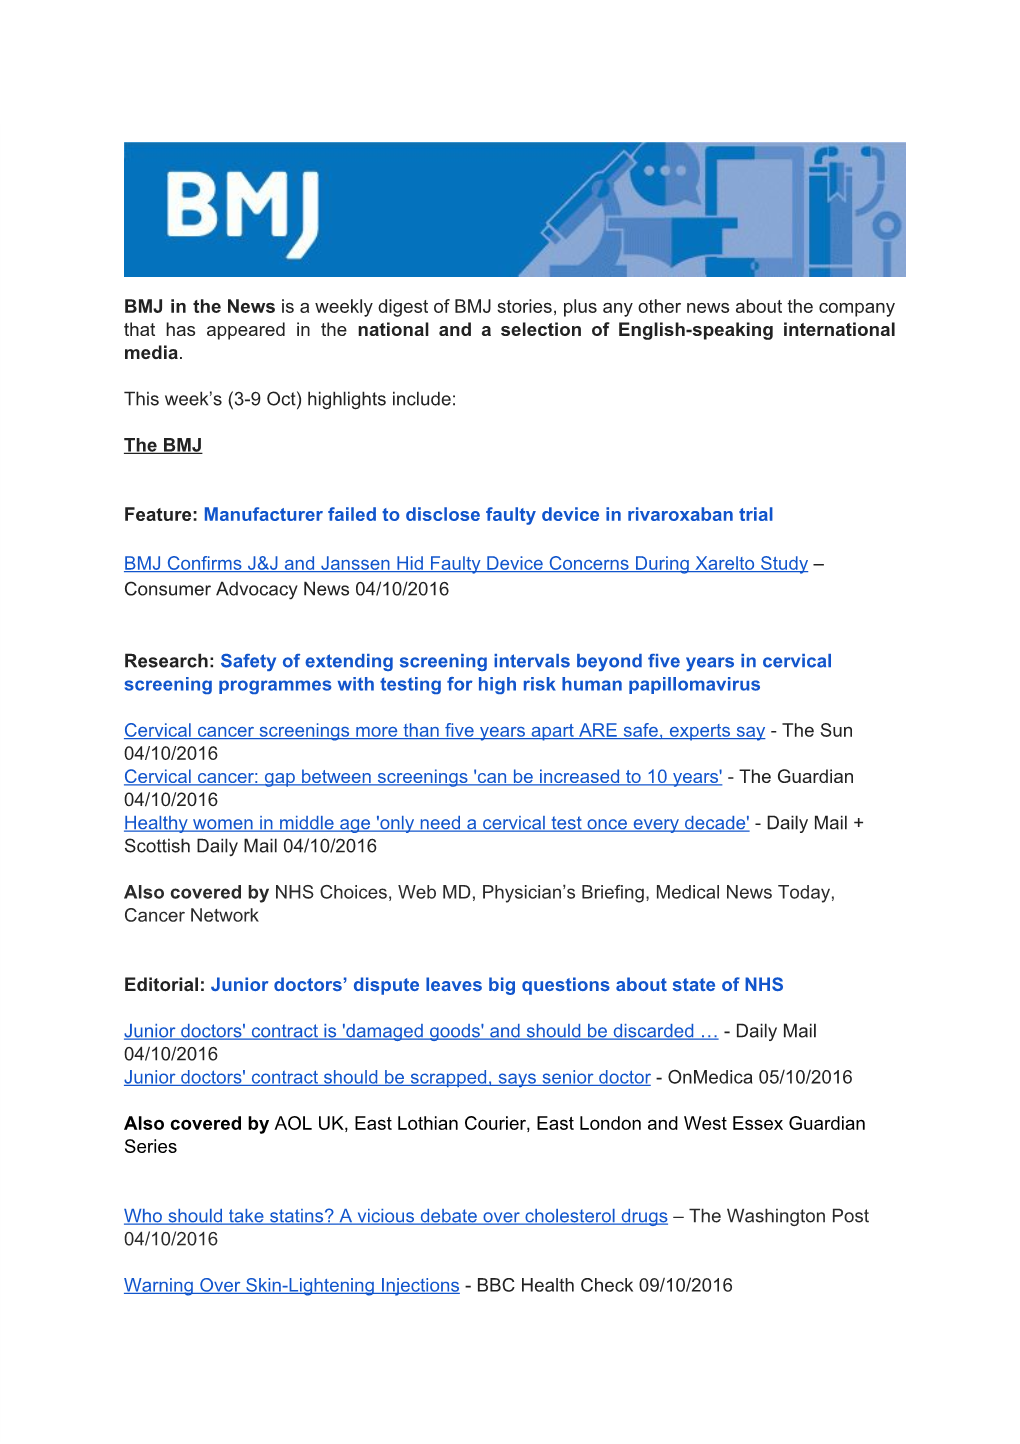 BMJ in the News Is a Weekly Digest of BMJ Stories, Plus Any Other News About the Company That Has Appeared in the ​ National